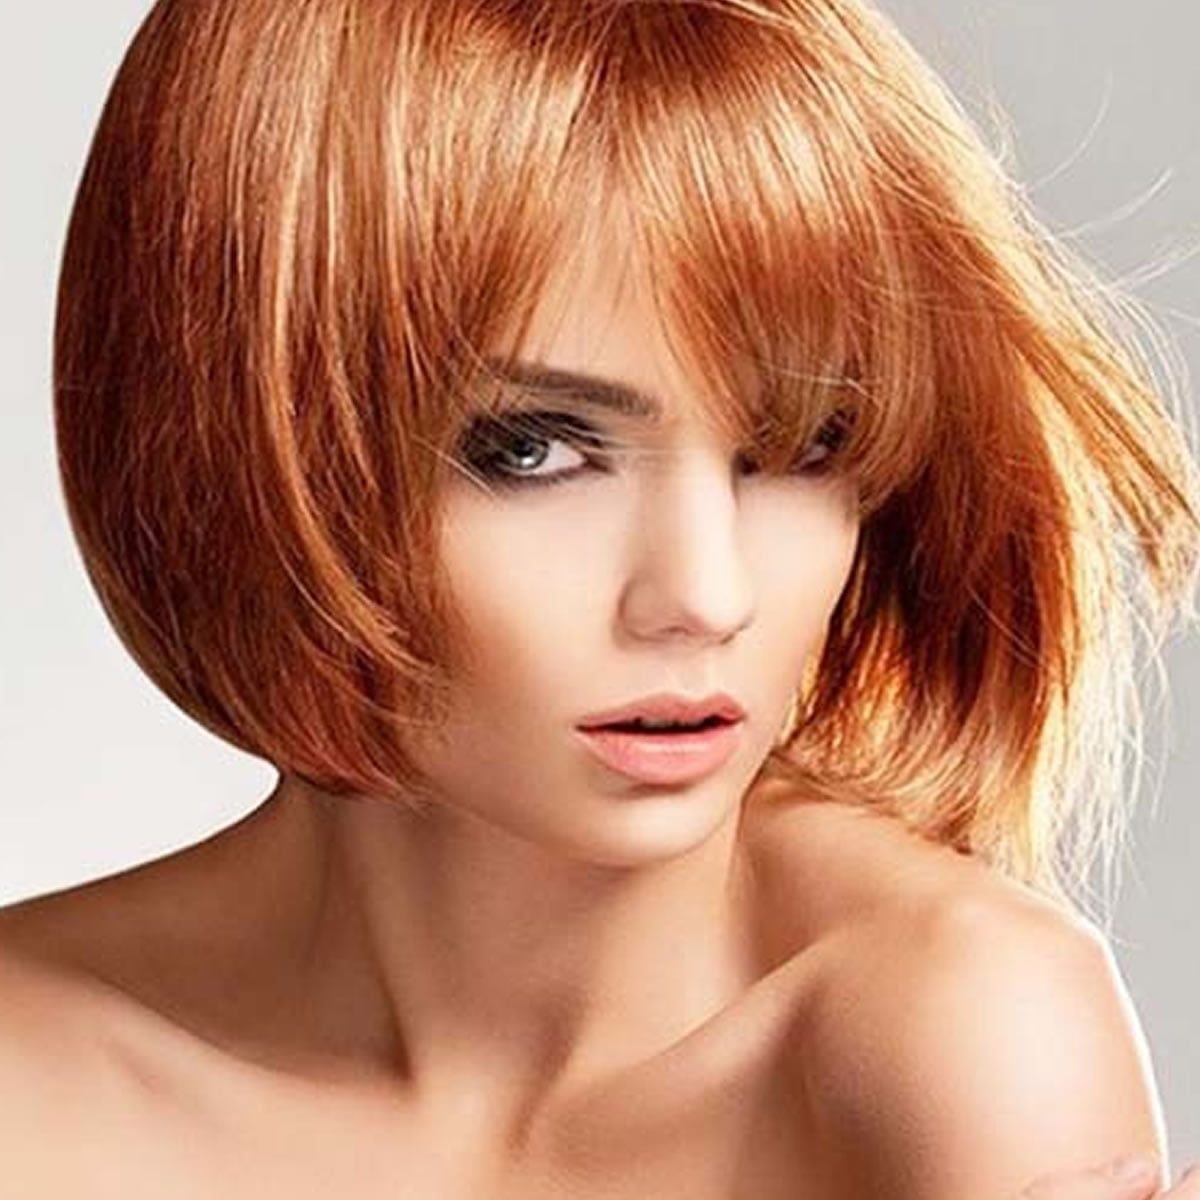 The Best 30 Short Bob Haircuts - 2018 Short Hairstyles for ...